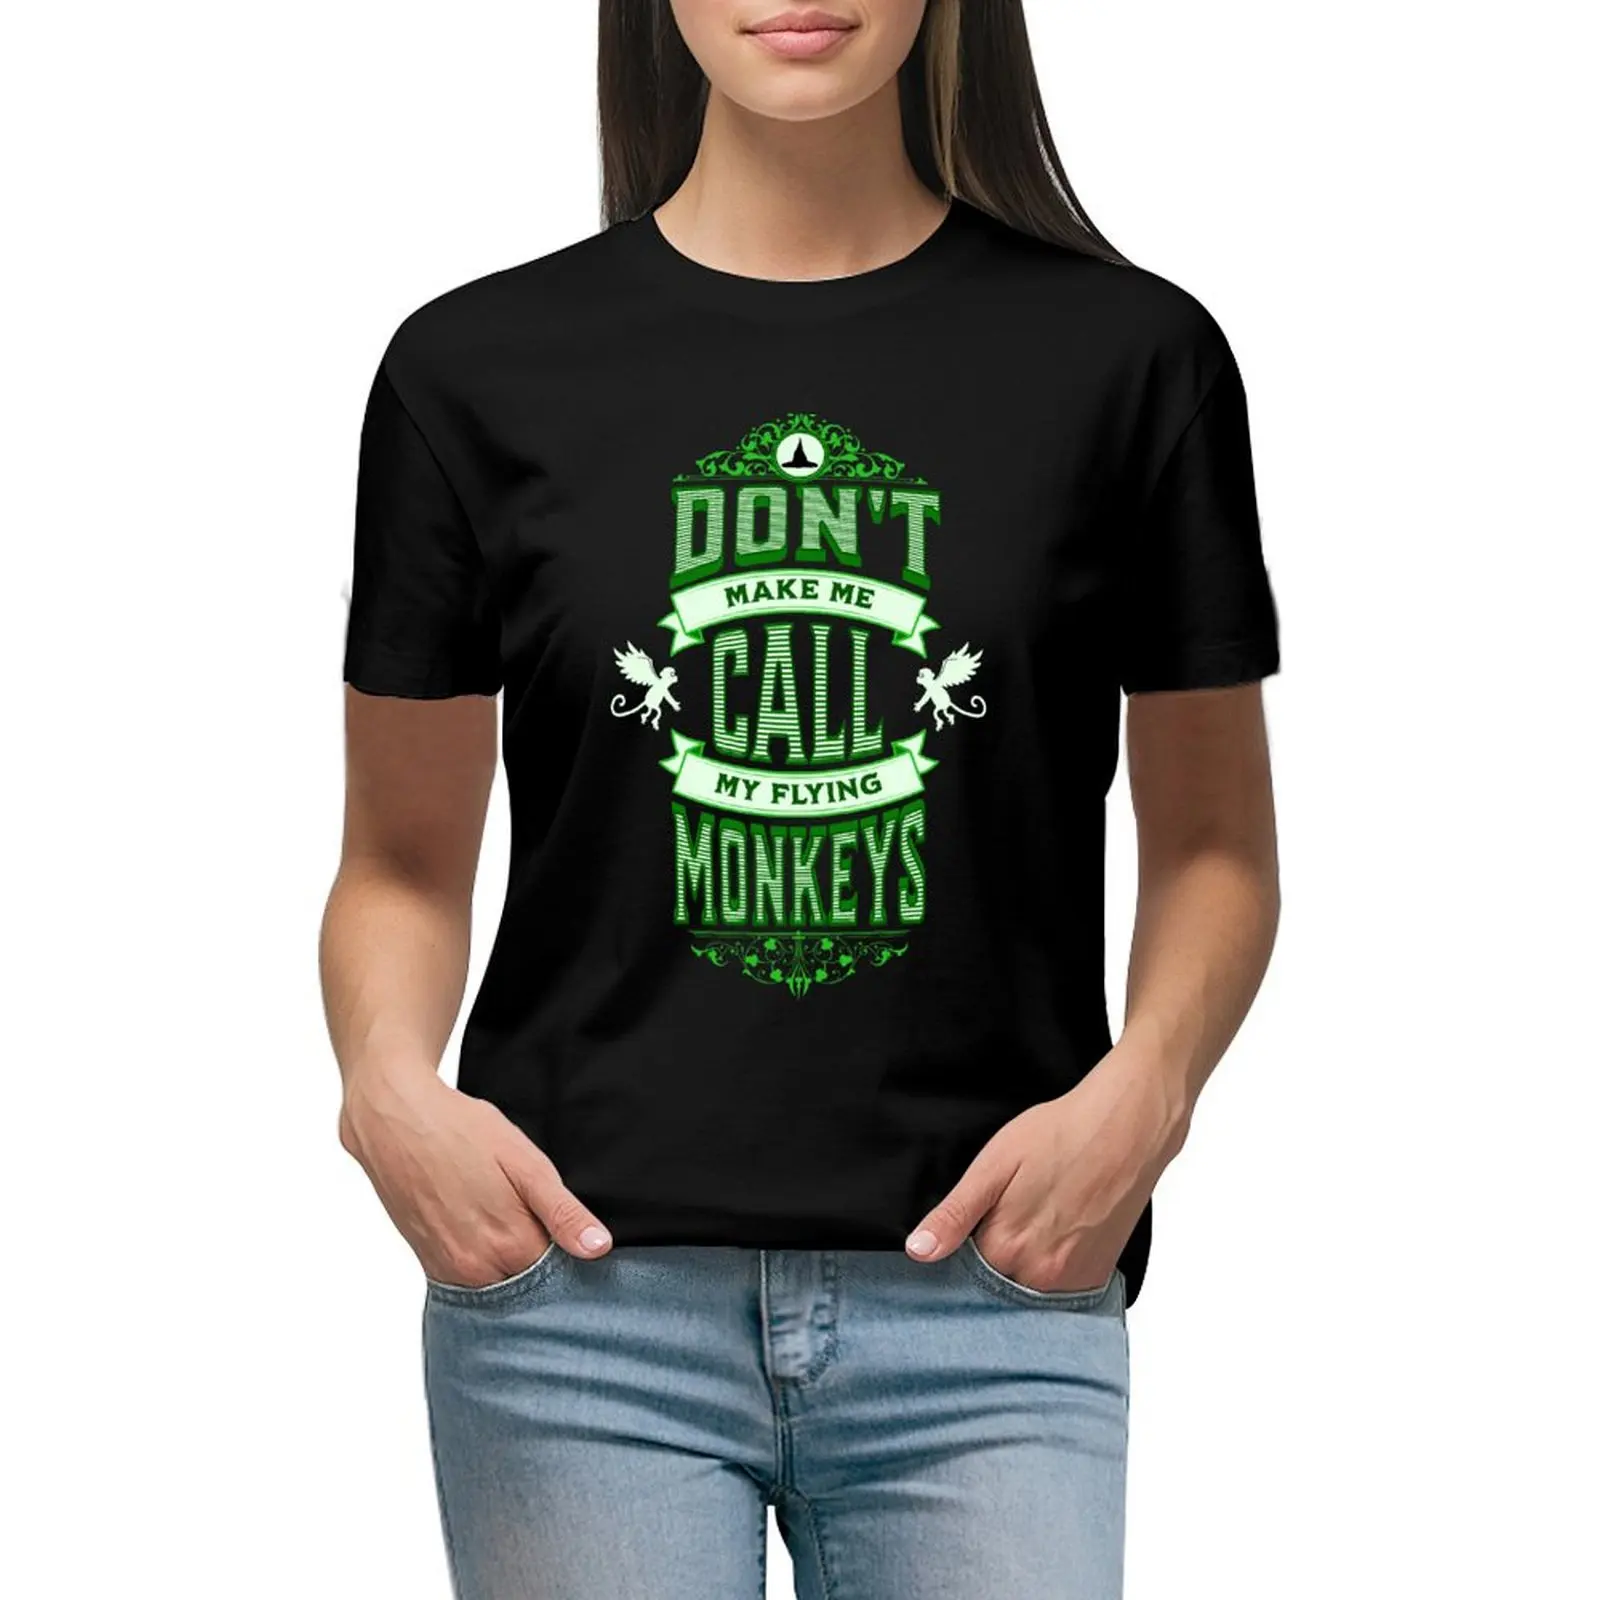 

Don't Make Me Call My Flying Monkeys T-shirt Female clothing shirts graphic tees tops designer clothes Women luxury